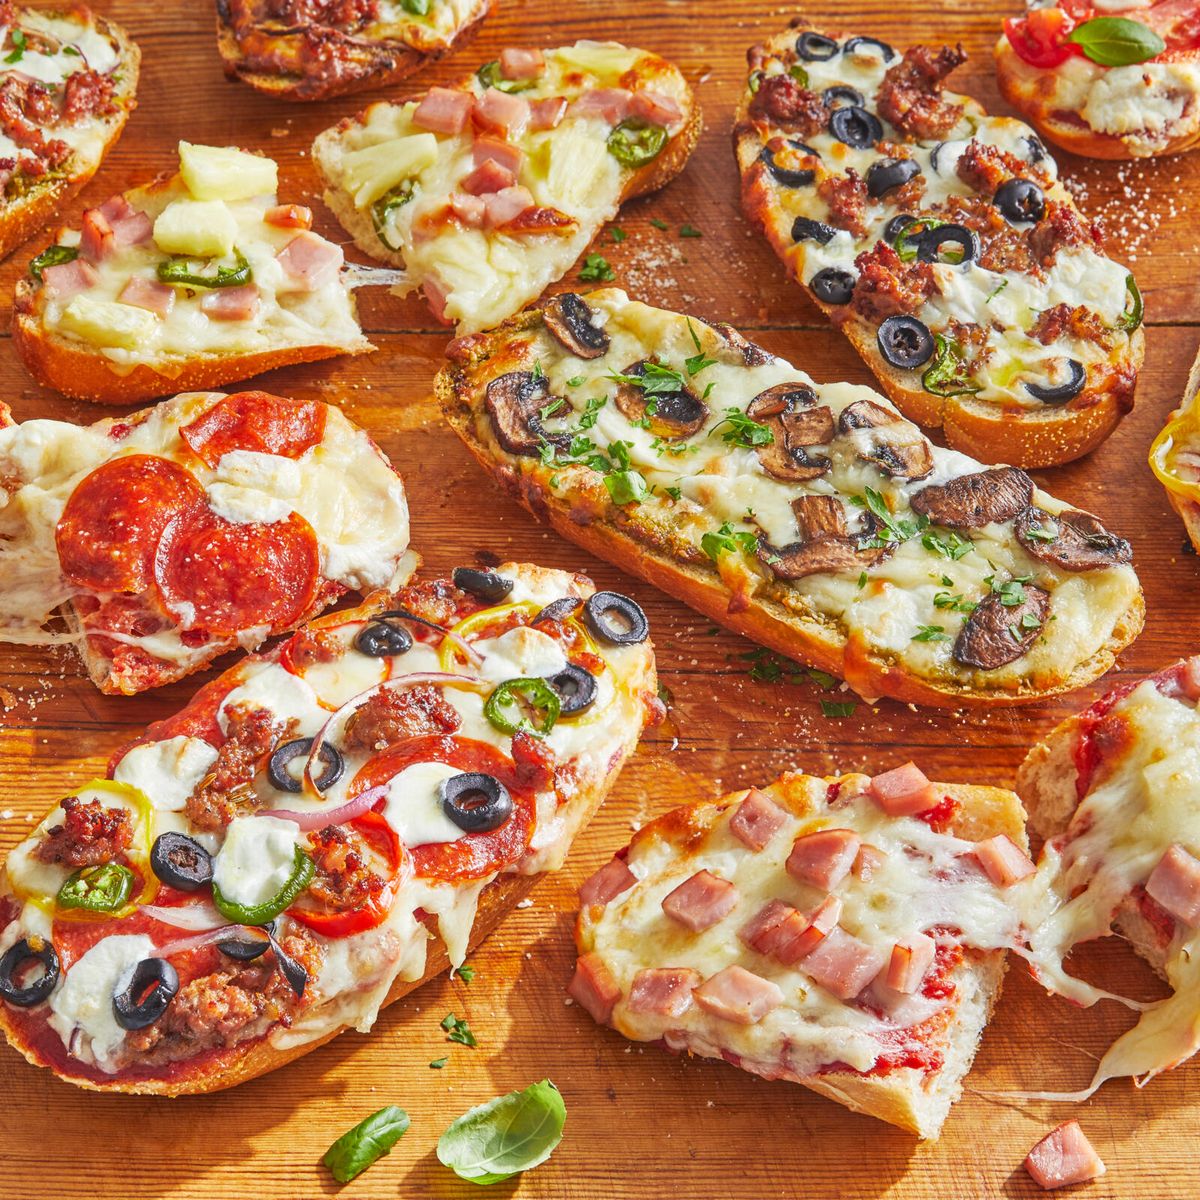 the pioneer woman's french bread pizza